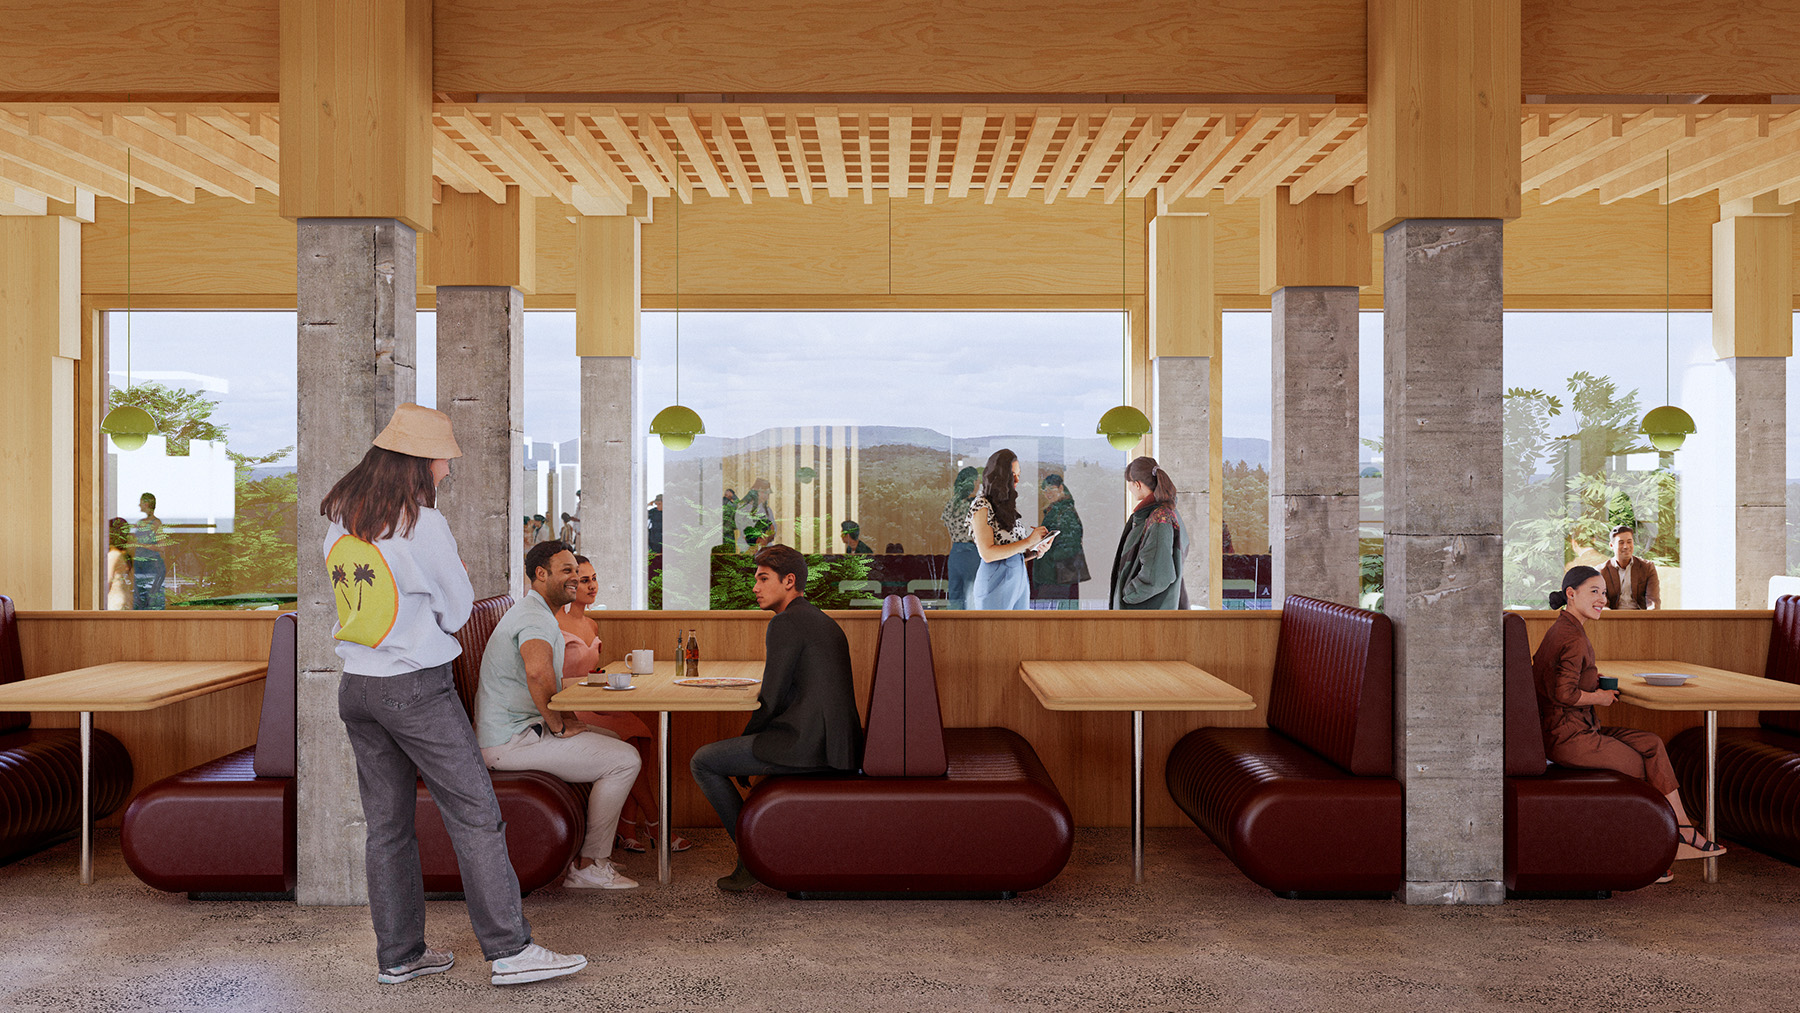 A rendering of benches in a modern looking cafe and food area